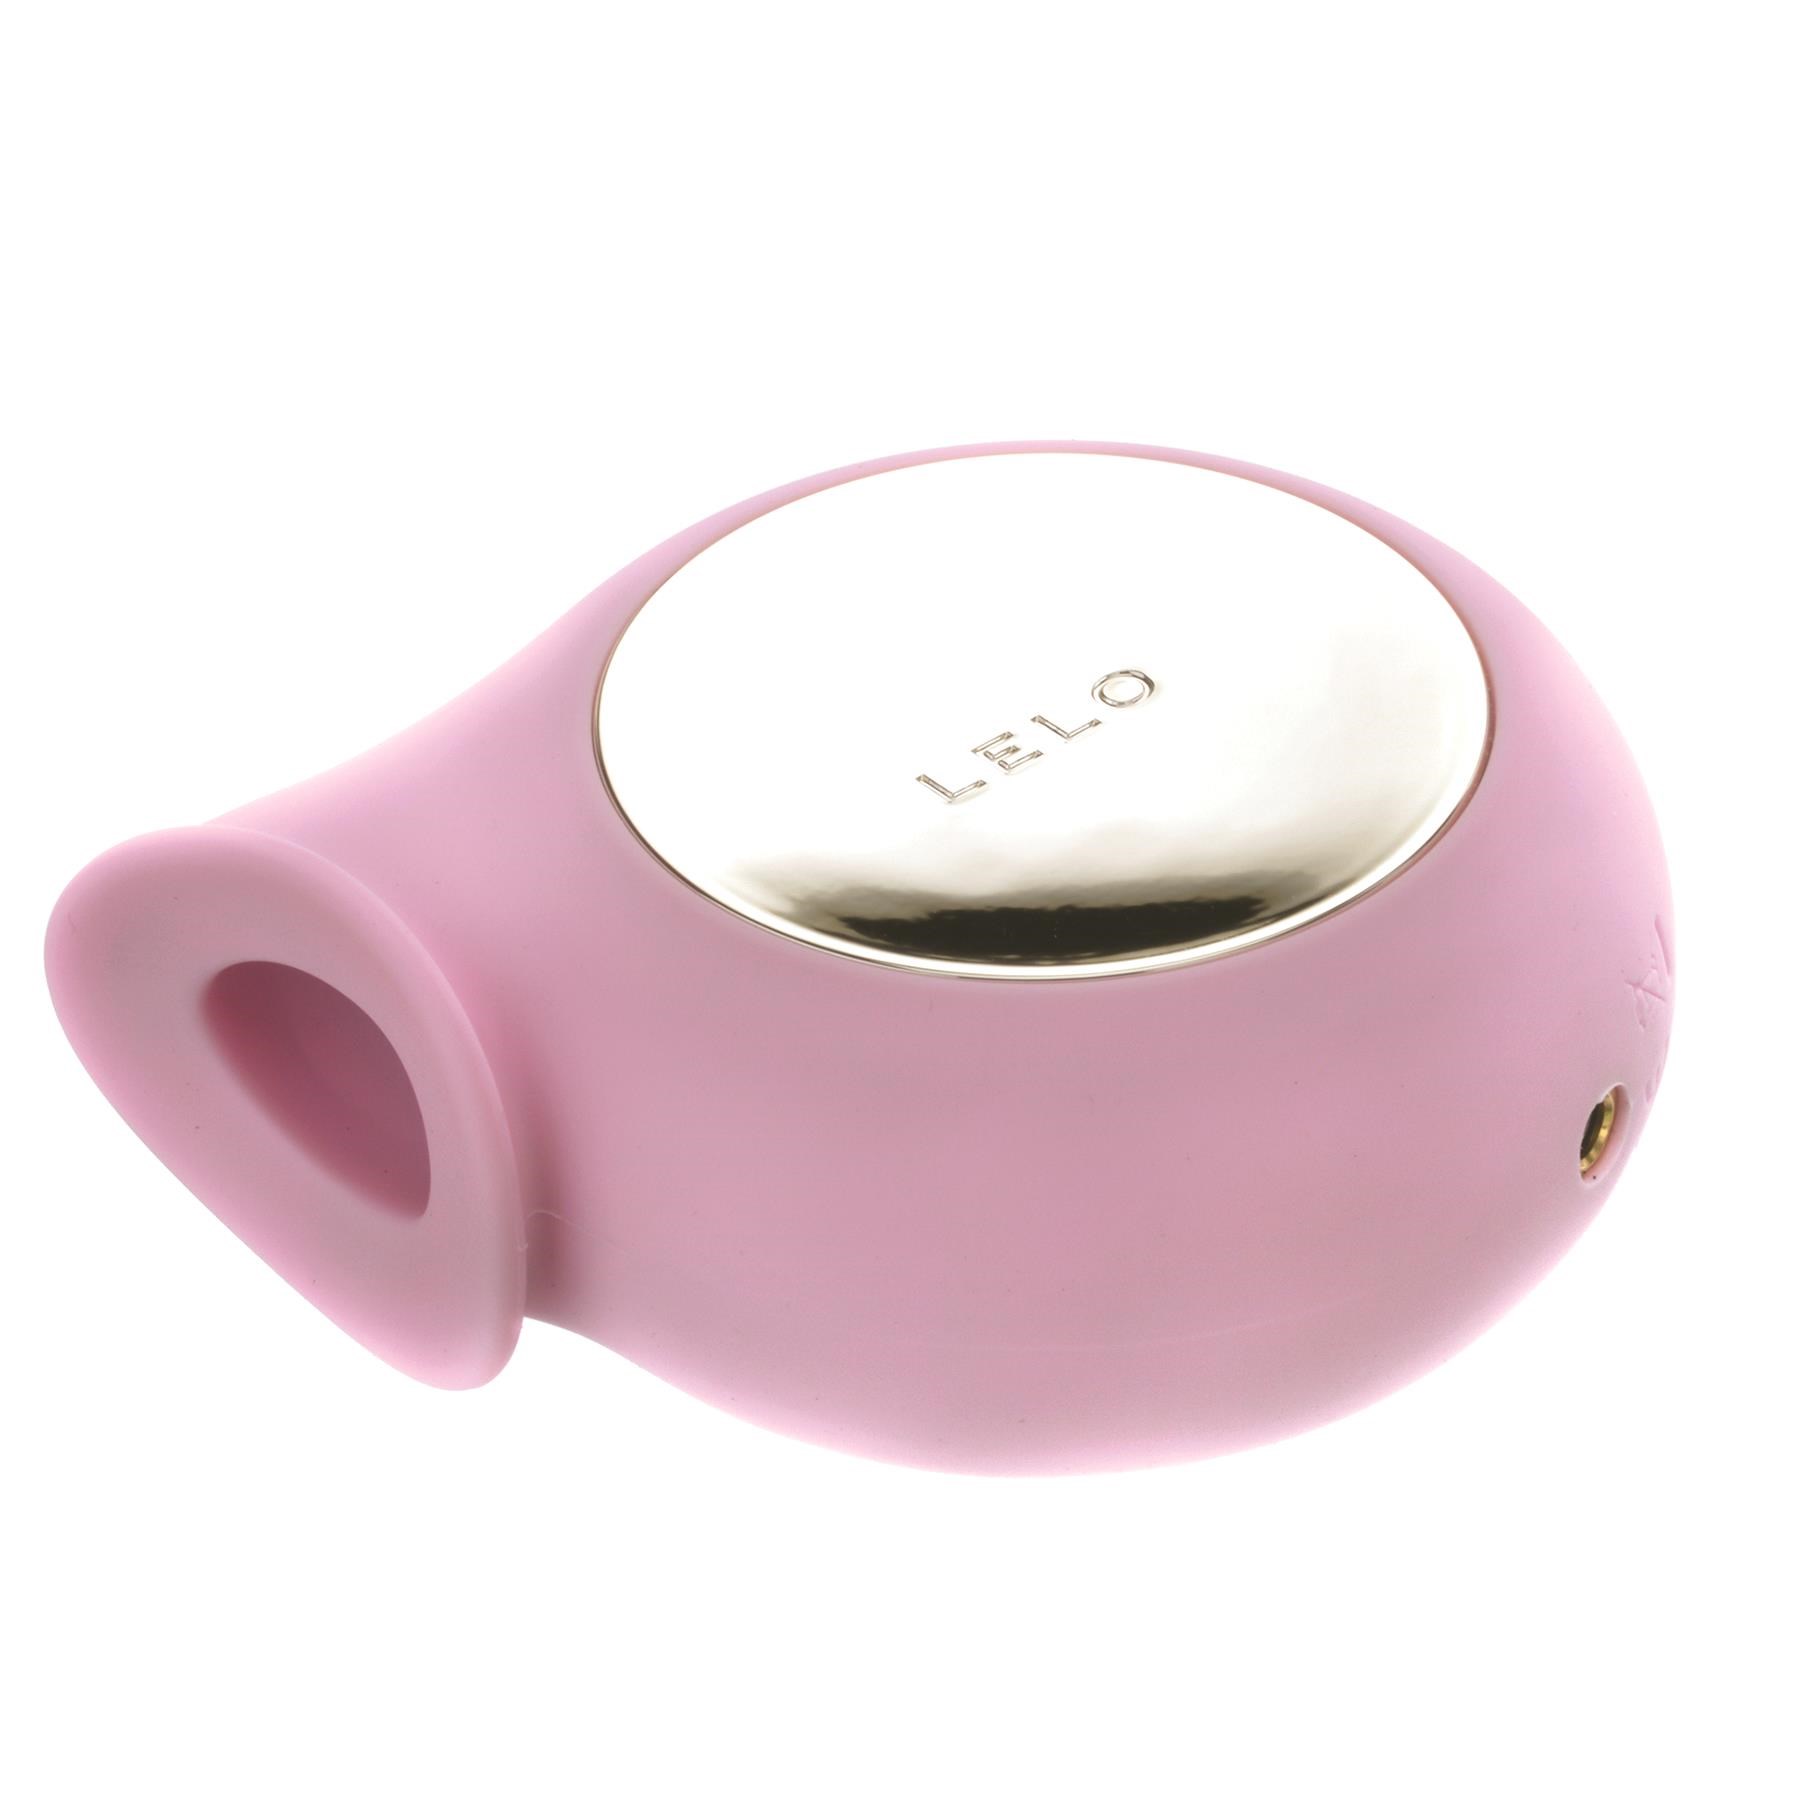 Lelo Sila Cruise Sonic Clitoral Massager - Product Shot #2